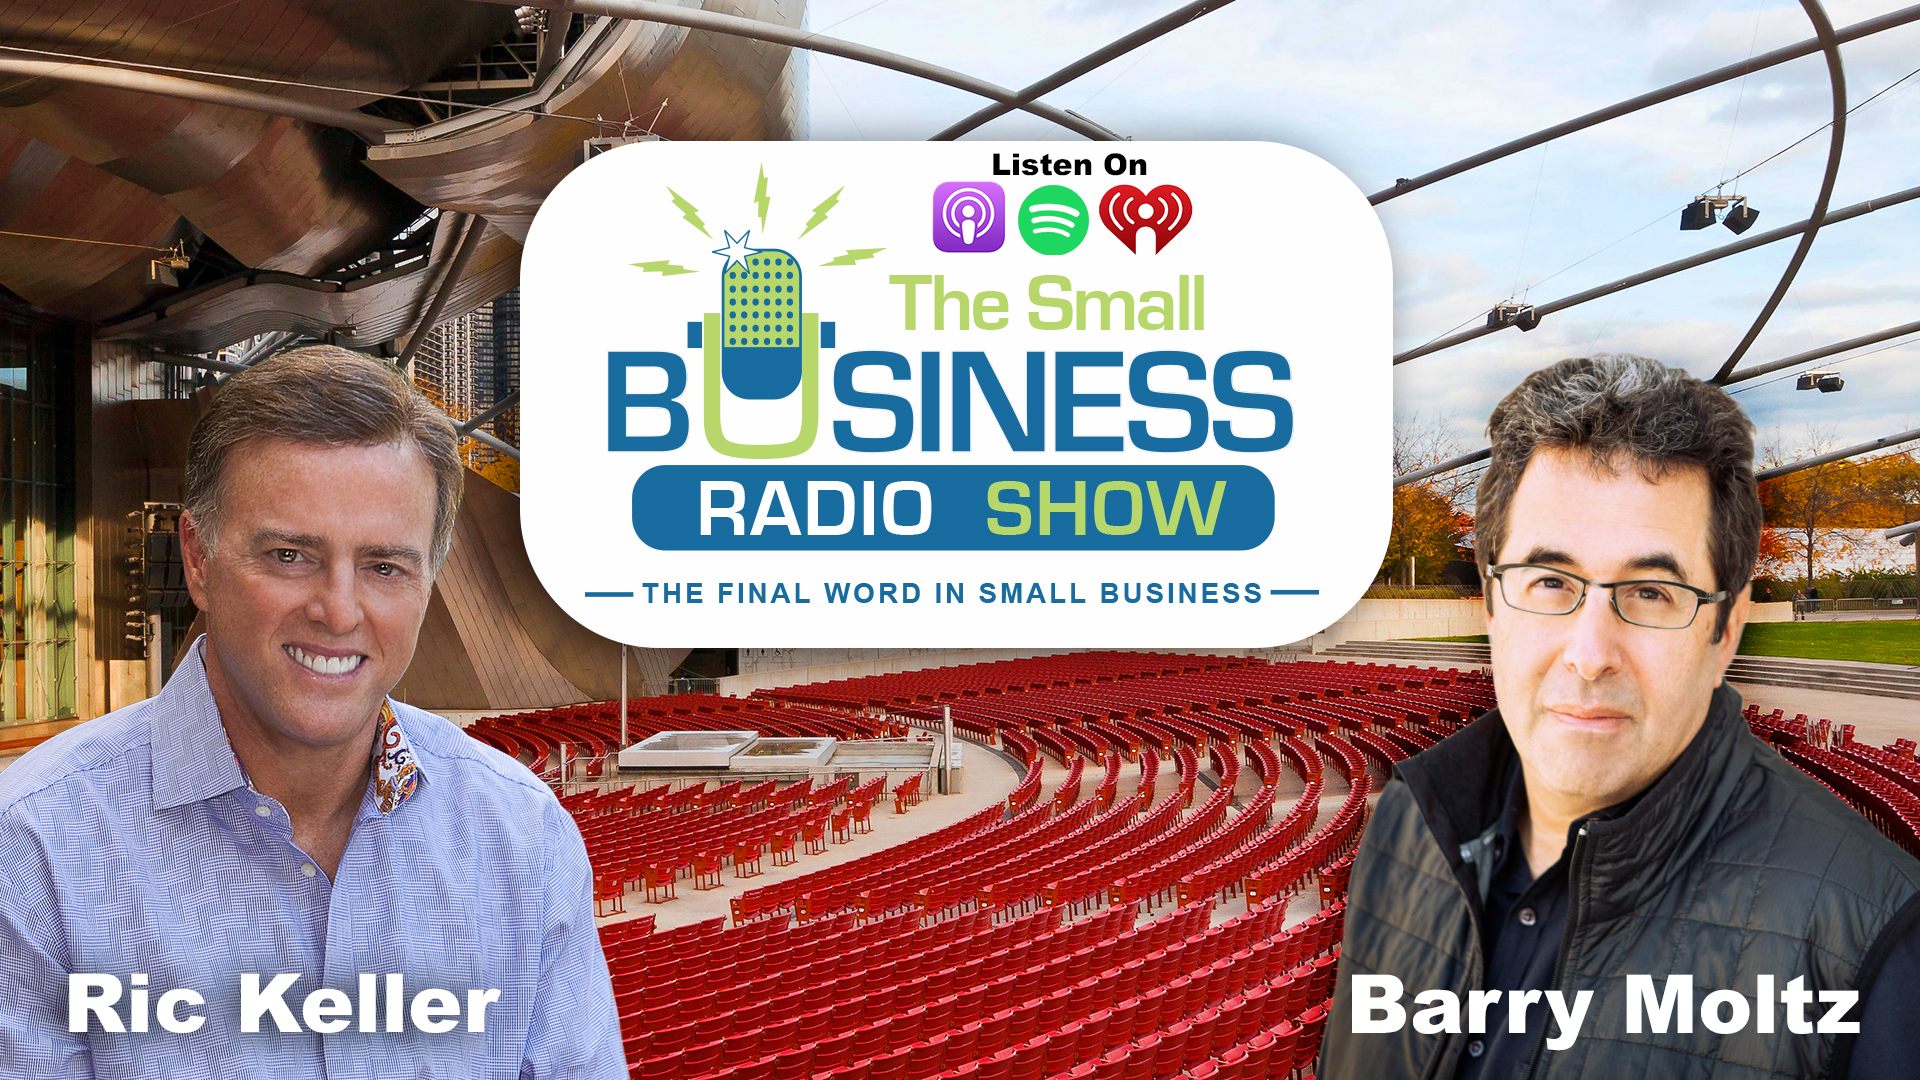 Ric Keller on The Small Business Radio Show